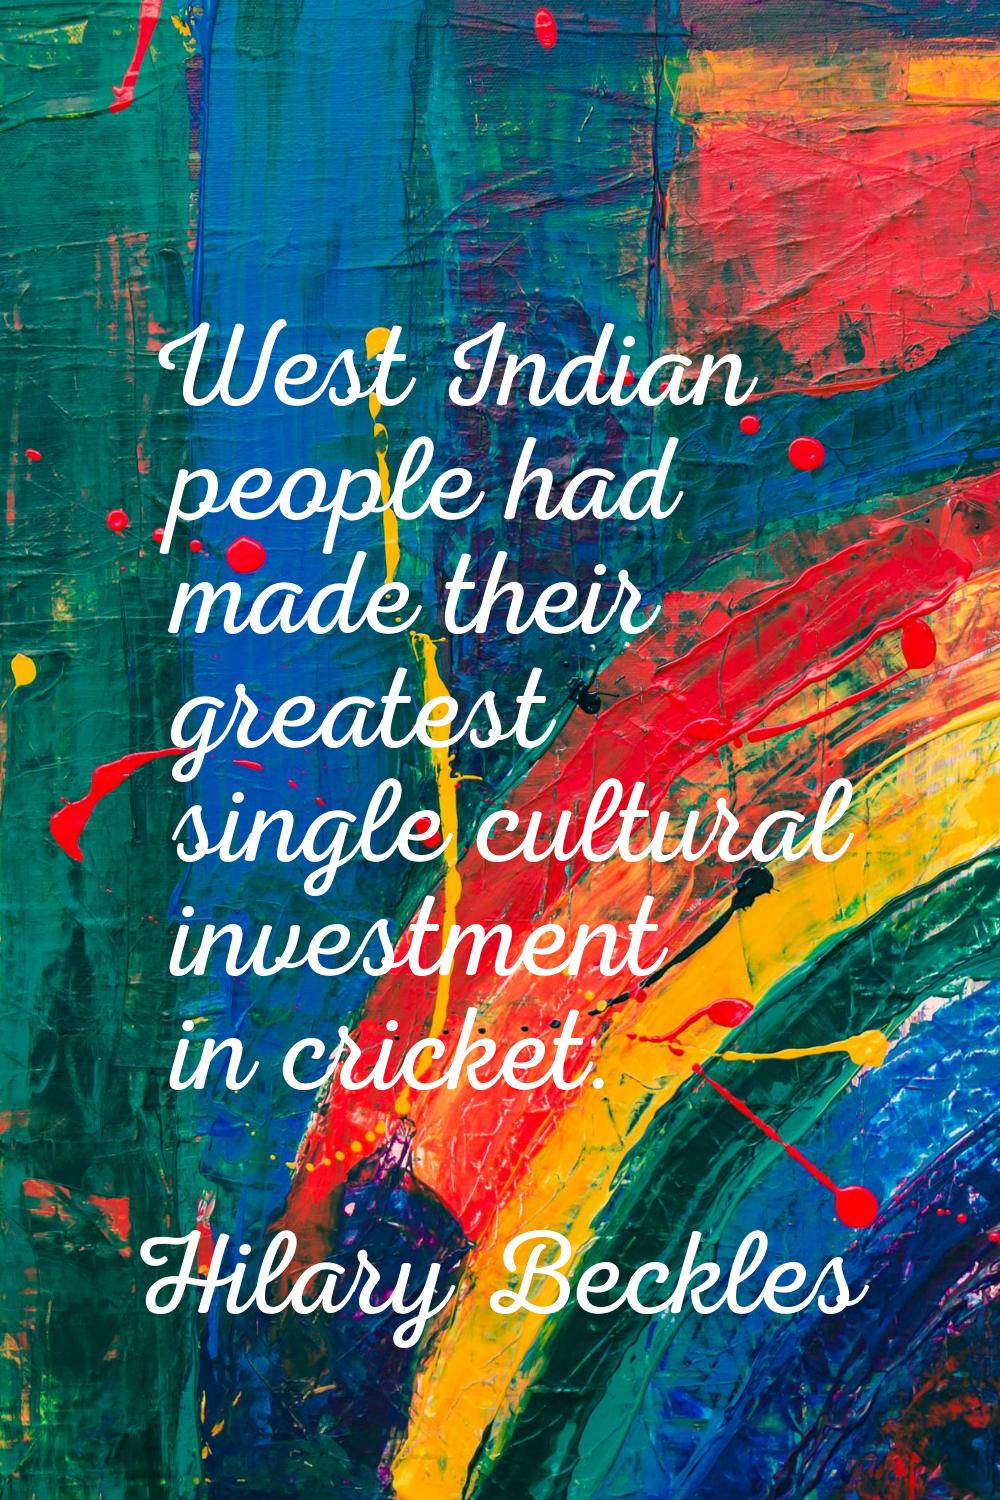 West Indian people had made their greatest single cultural investment in cricket.